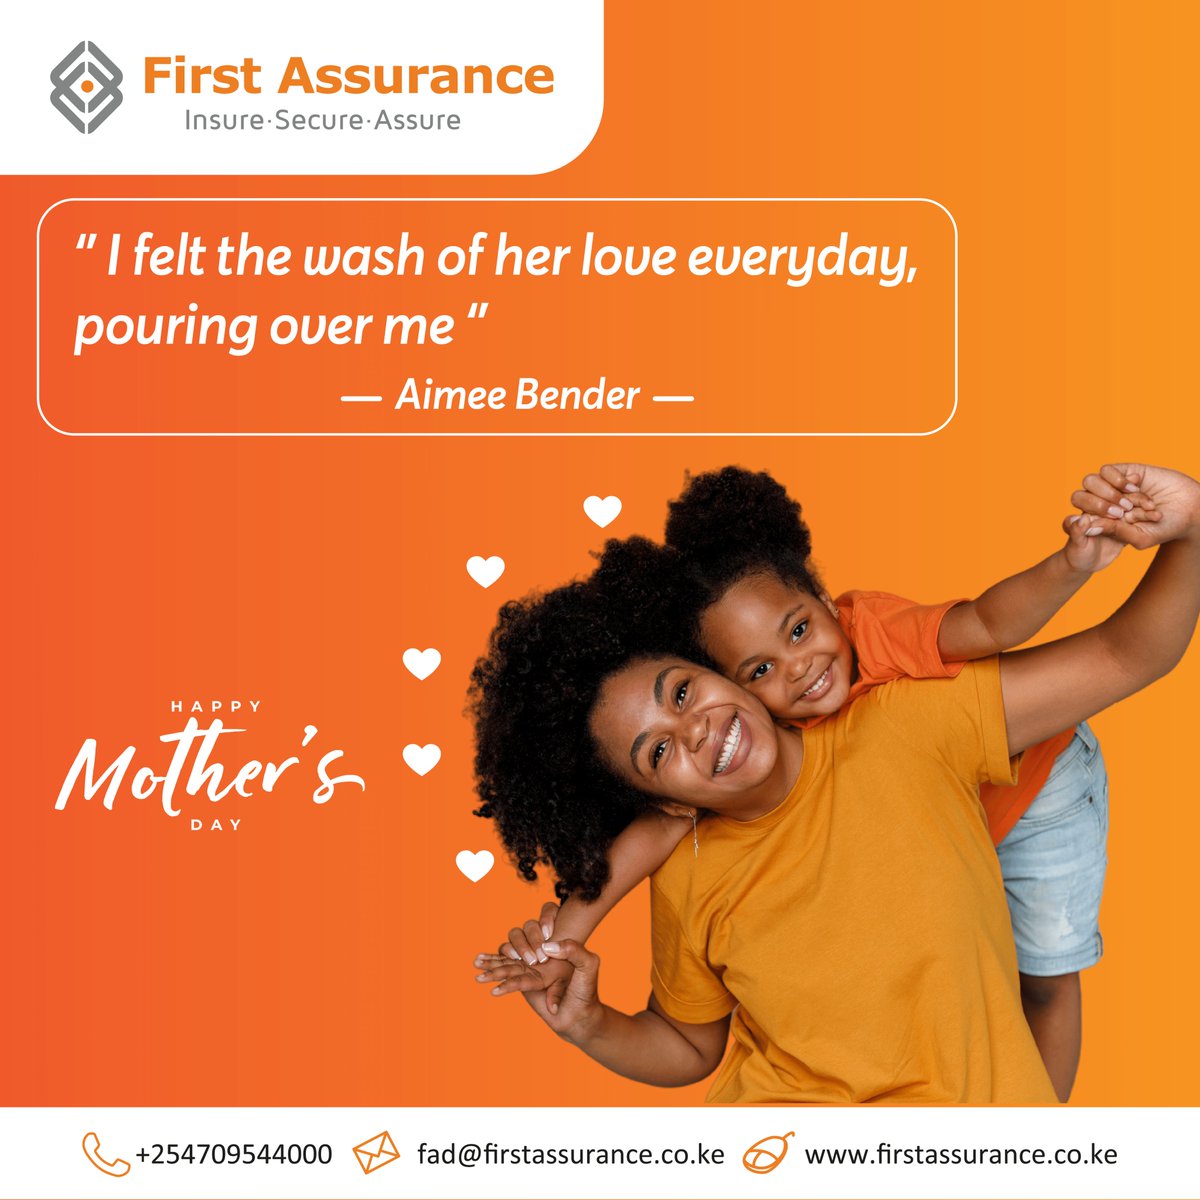 #MothersDayGiveaway 

Stand a chance to win heartwarming hampers!

How to win:
1. Follow us on all our social media platforms 
2. Like this post.
3. In the comments below, tell us how your mum has been a guiding light 

#MothersDay #FirstAssurance #Firstthingsfirst